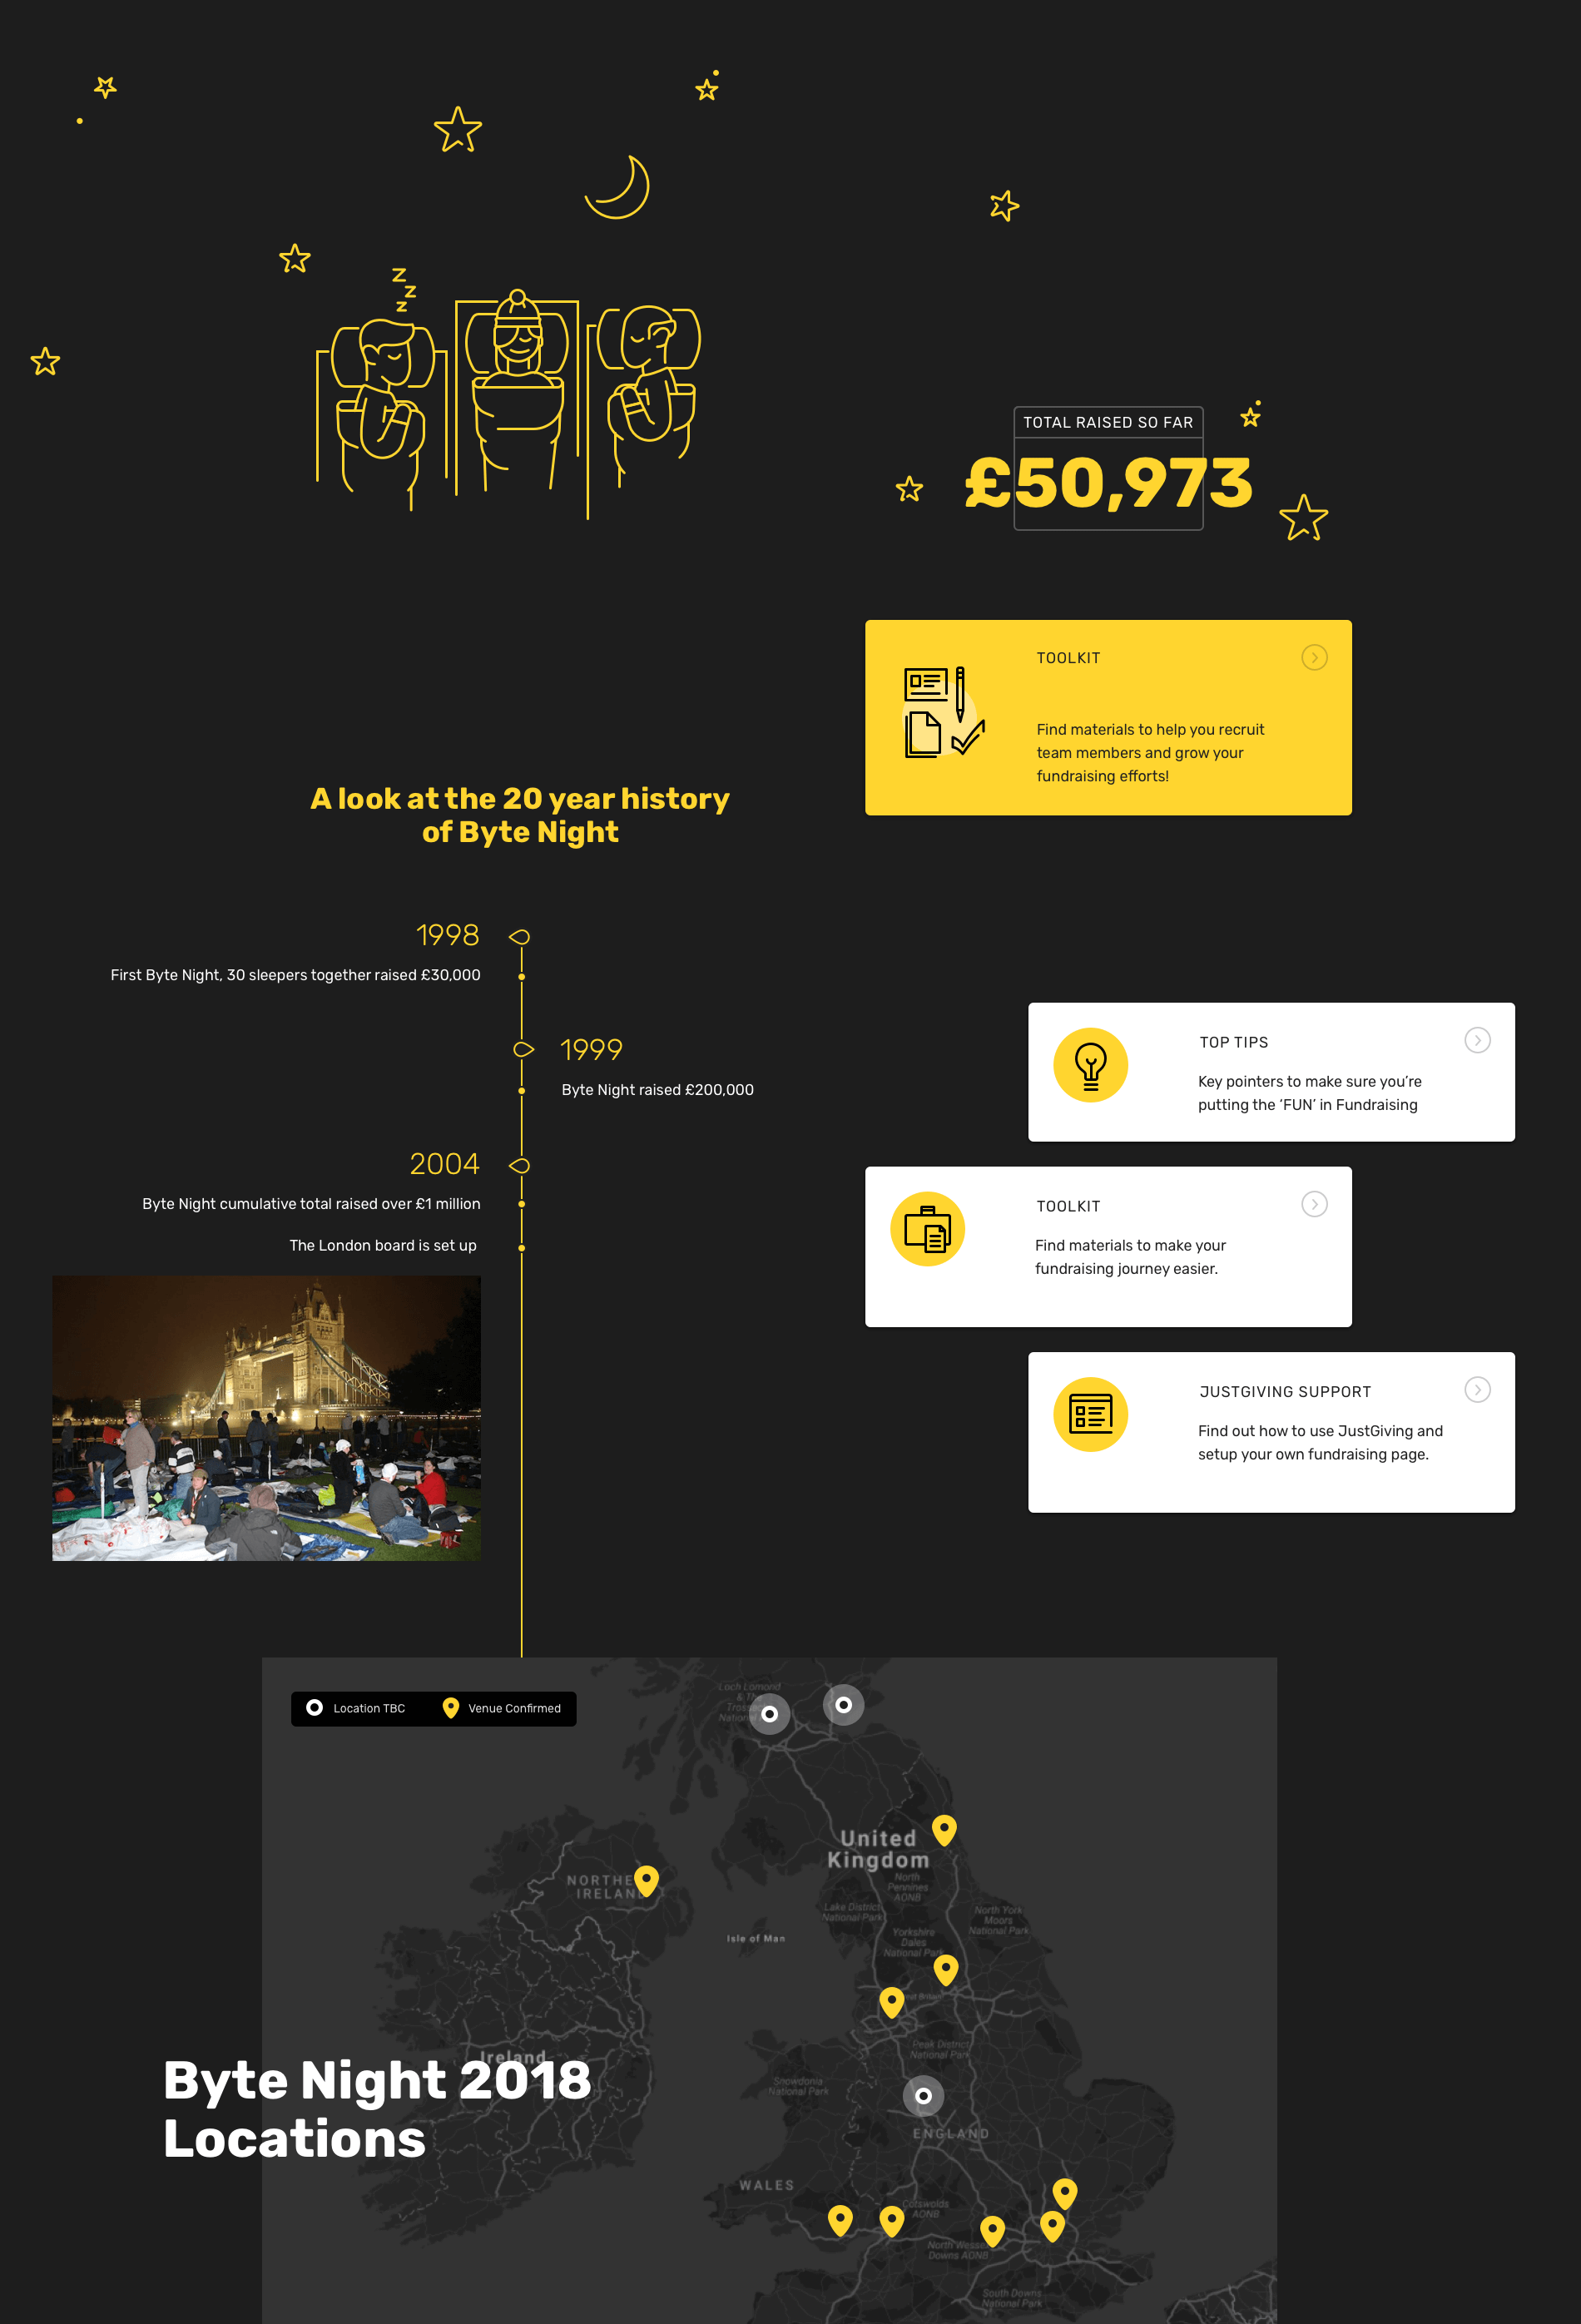 Compilation of designed assets created for the Byte Night website